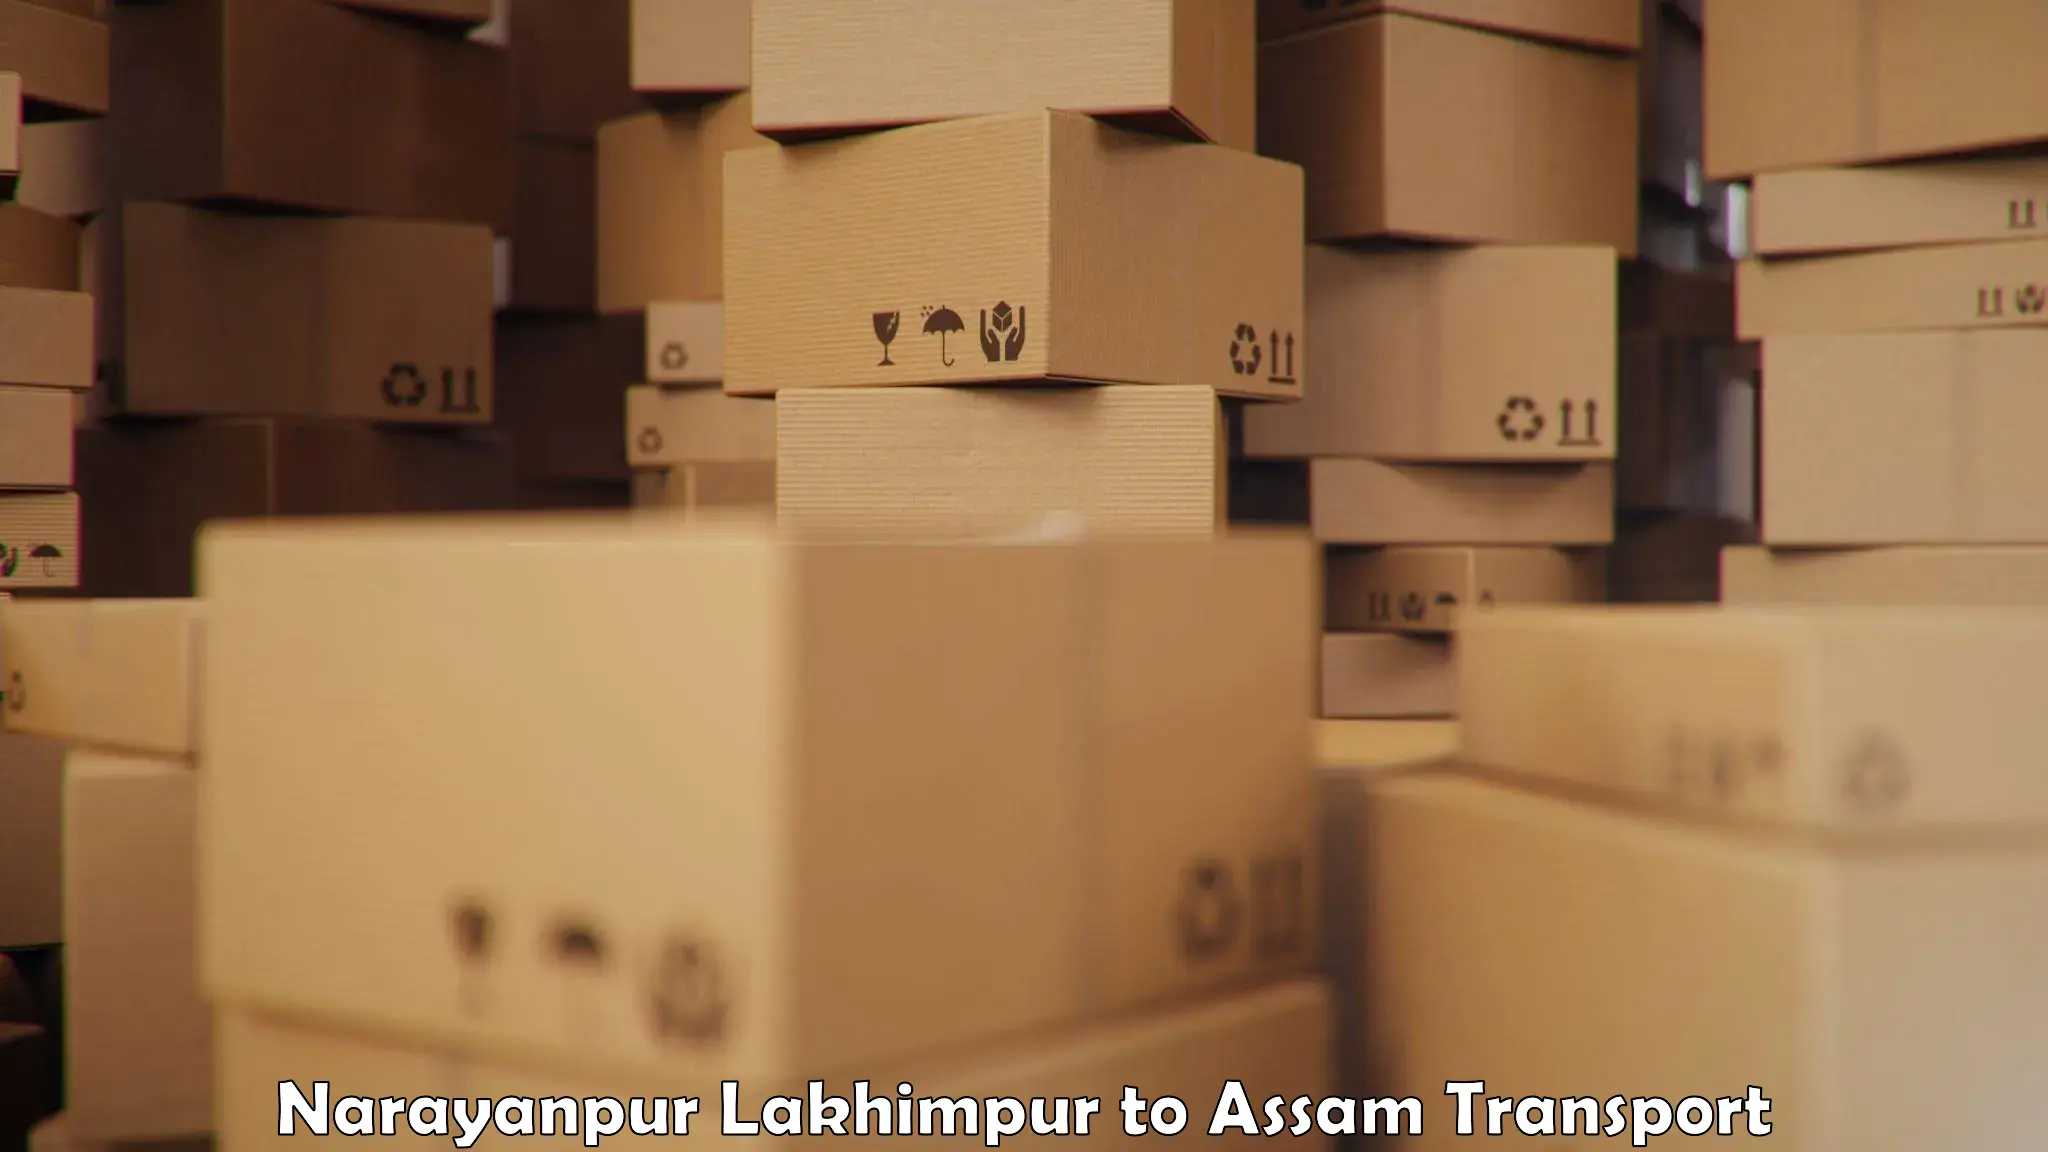 Cargo train transport services in Narayanpur Lakhimpur to Kaliabor